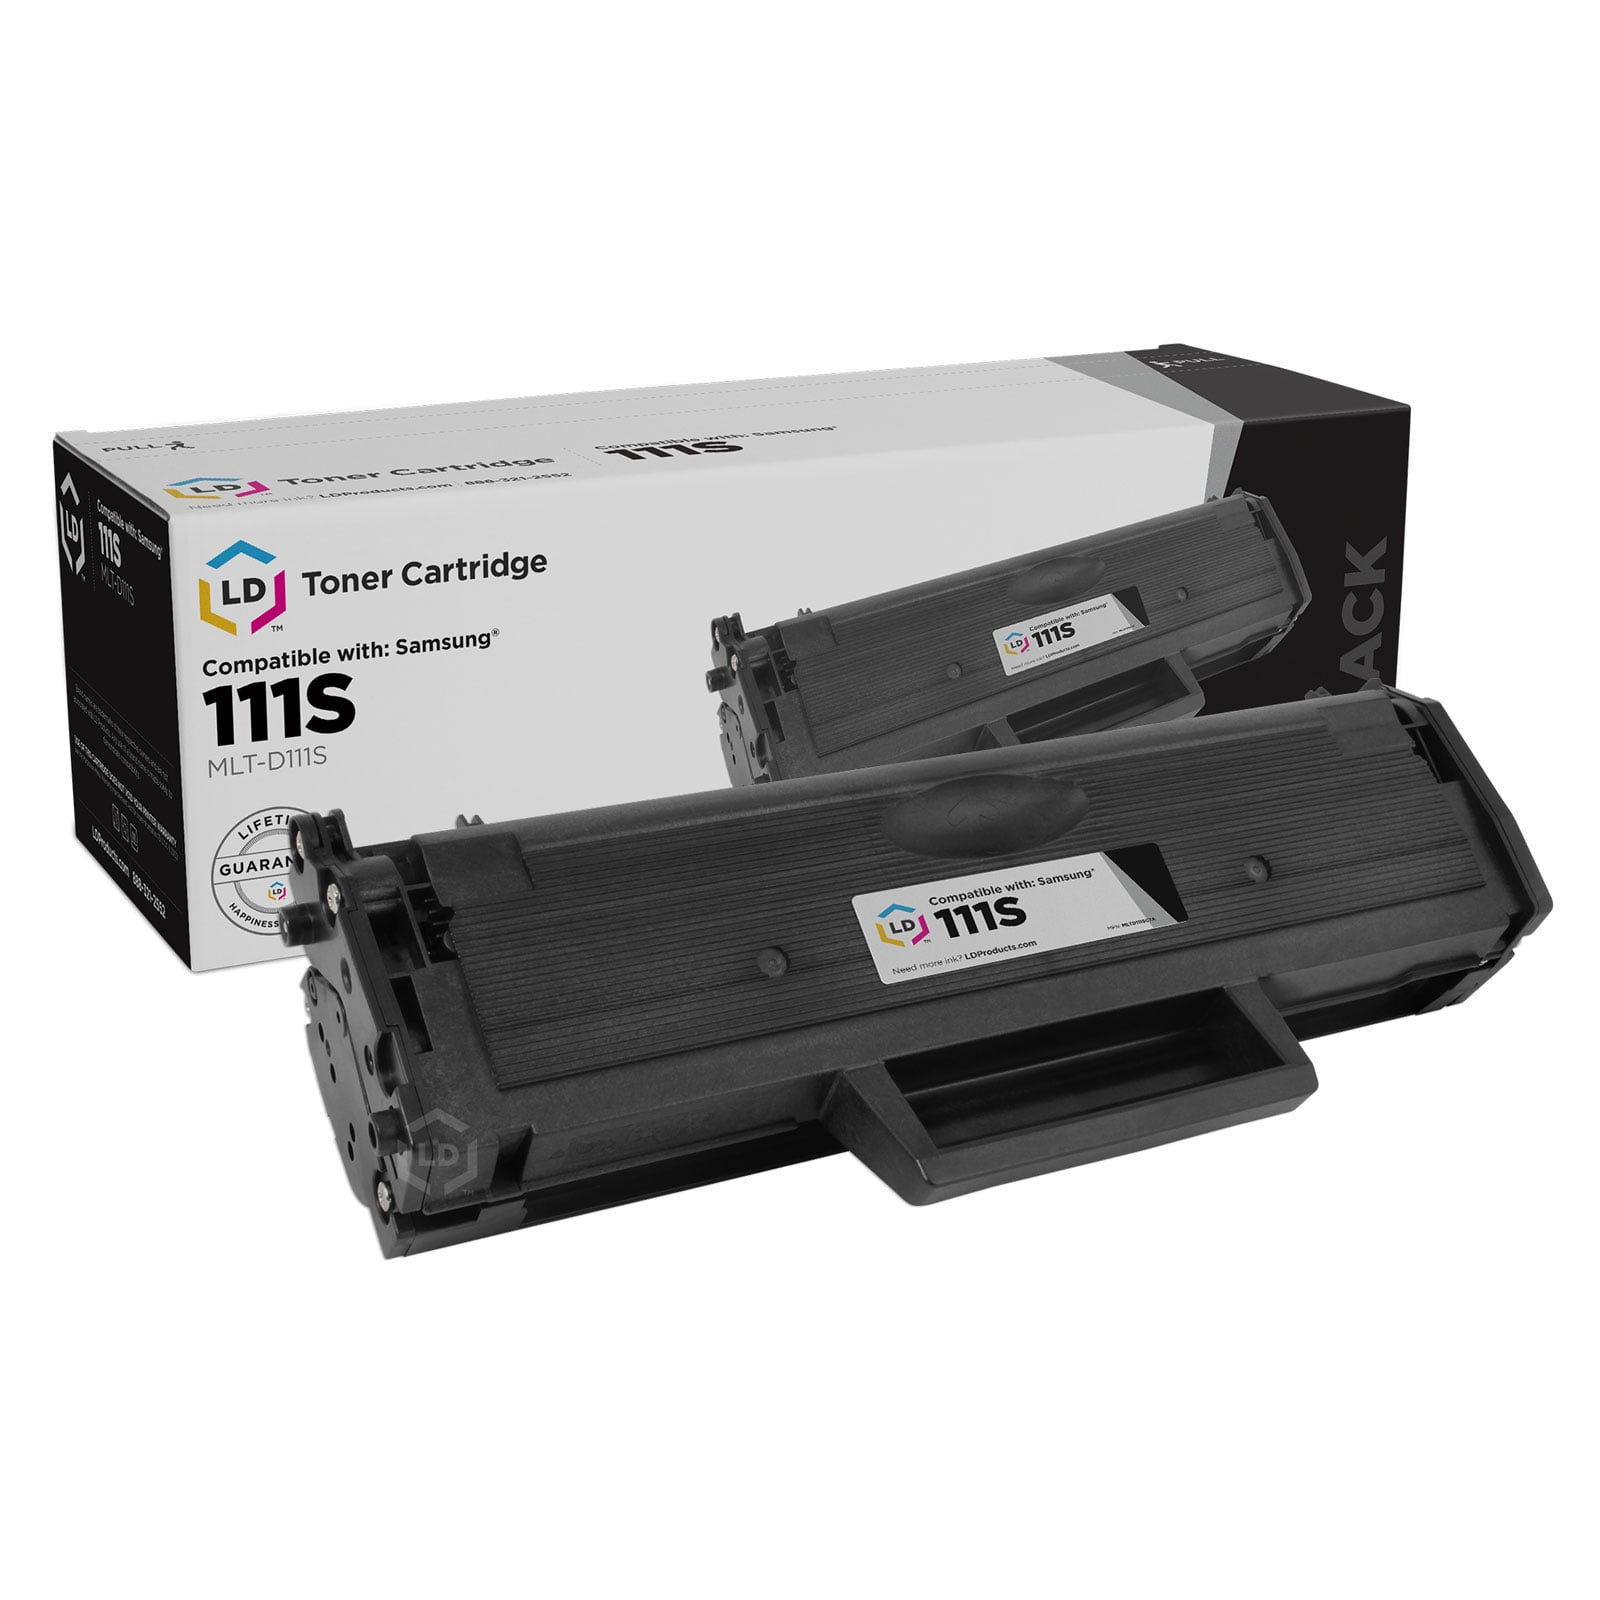 LD Compatible Replacement for Samsung MLT-D111S Laser Cartridge for use in Samsung M2020W, and M2070FW s -